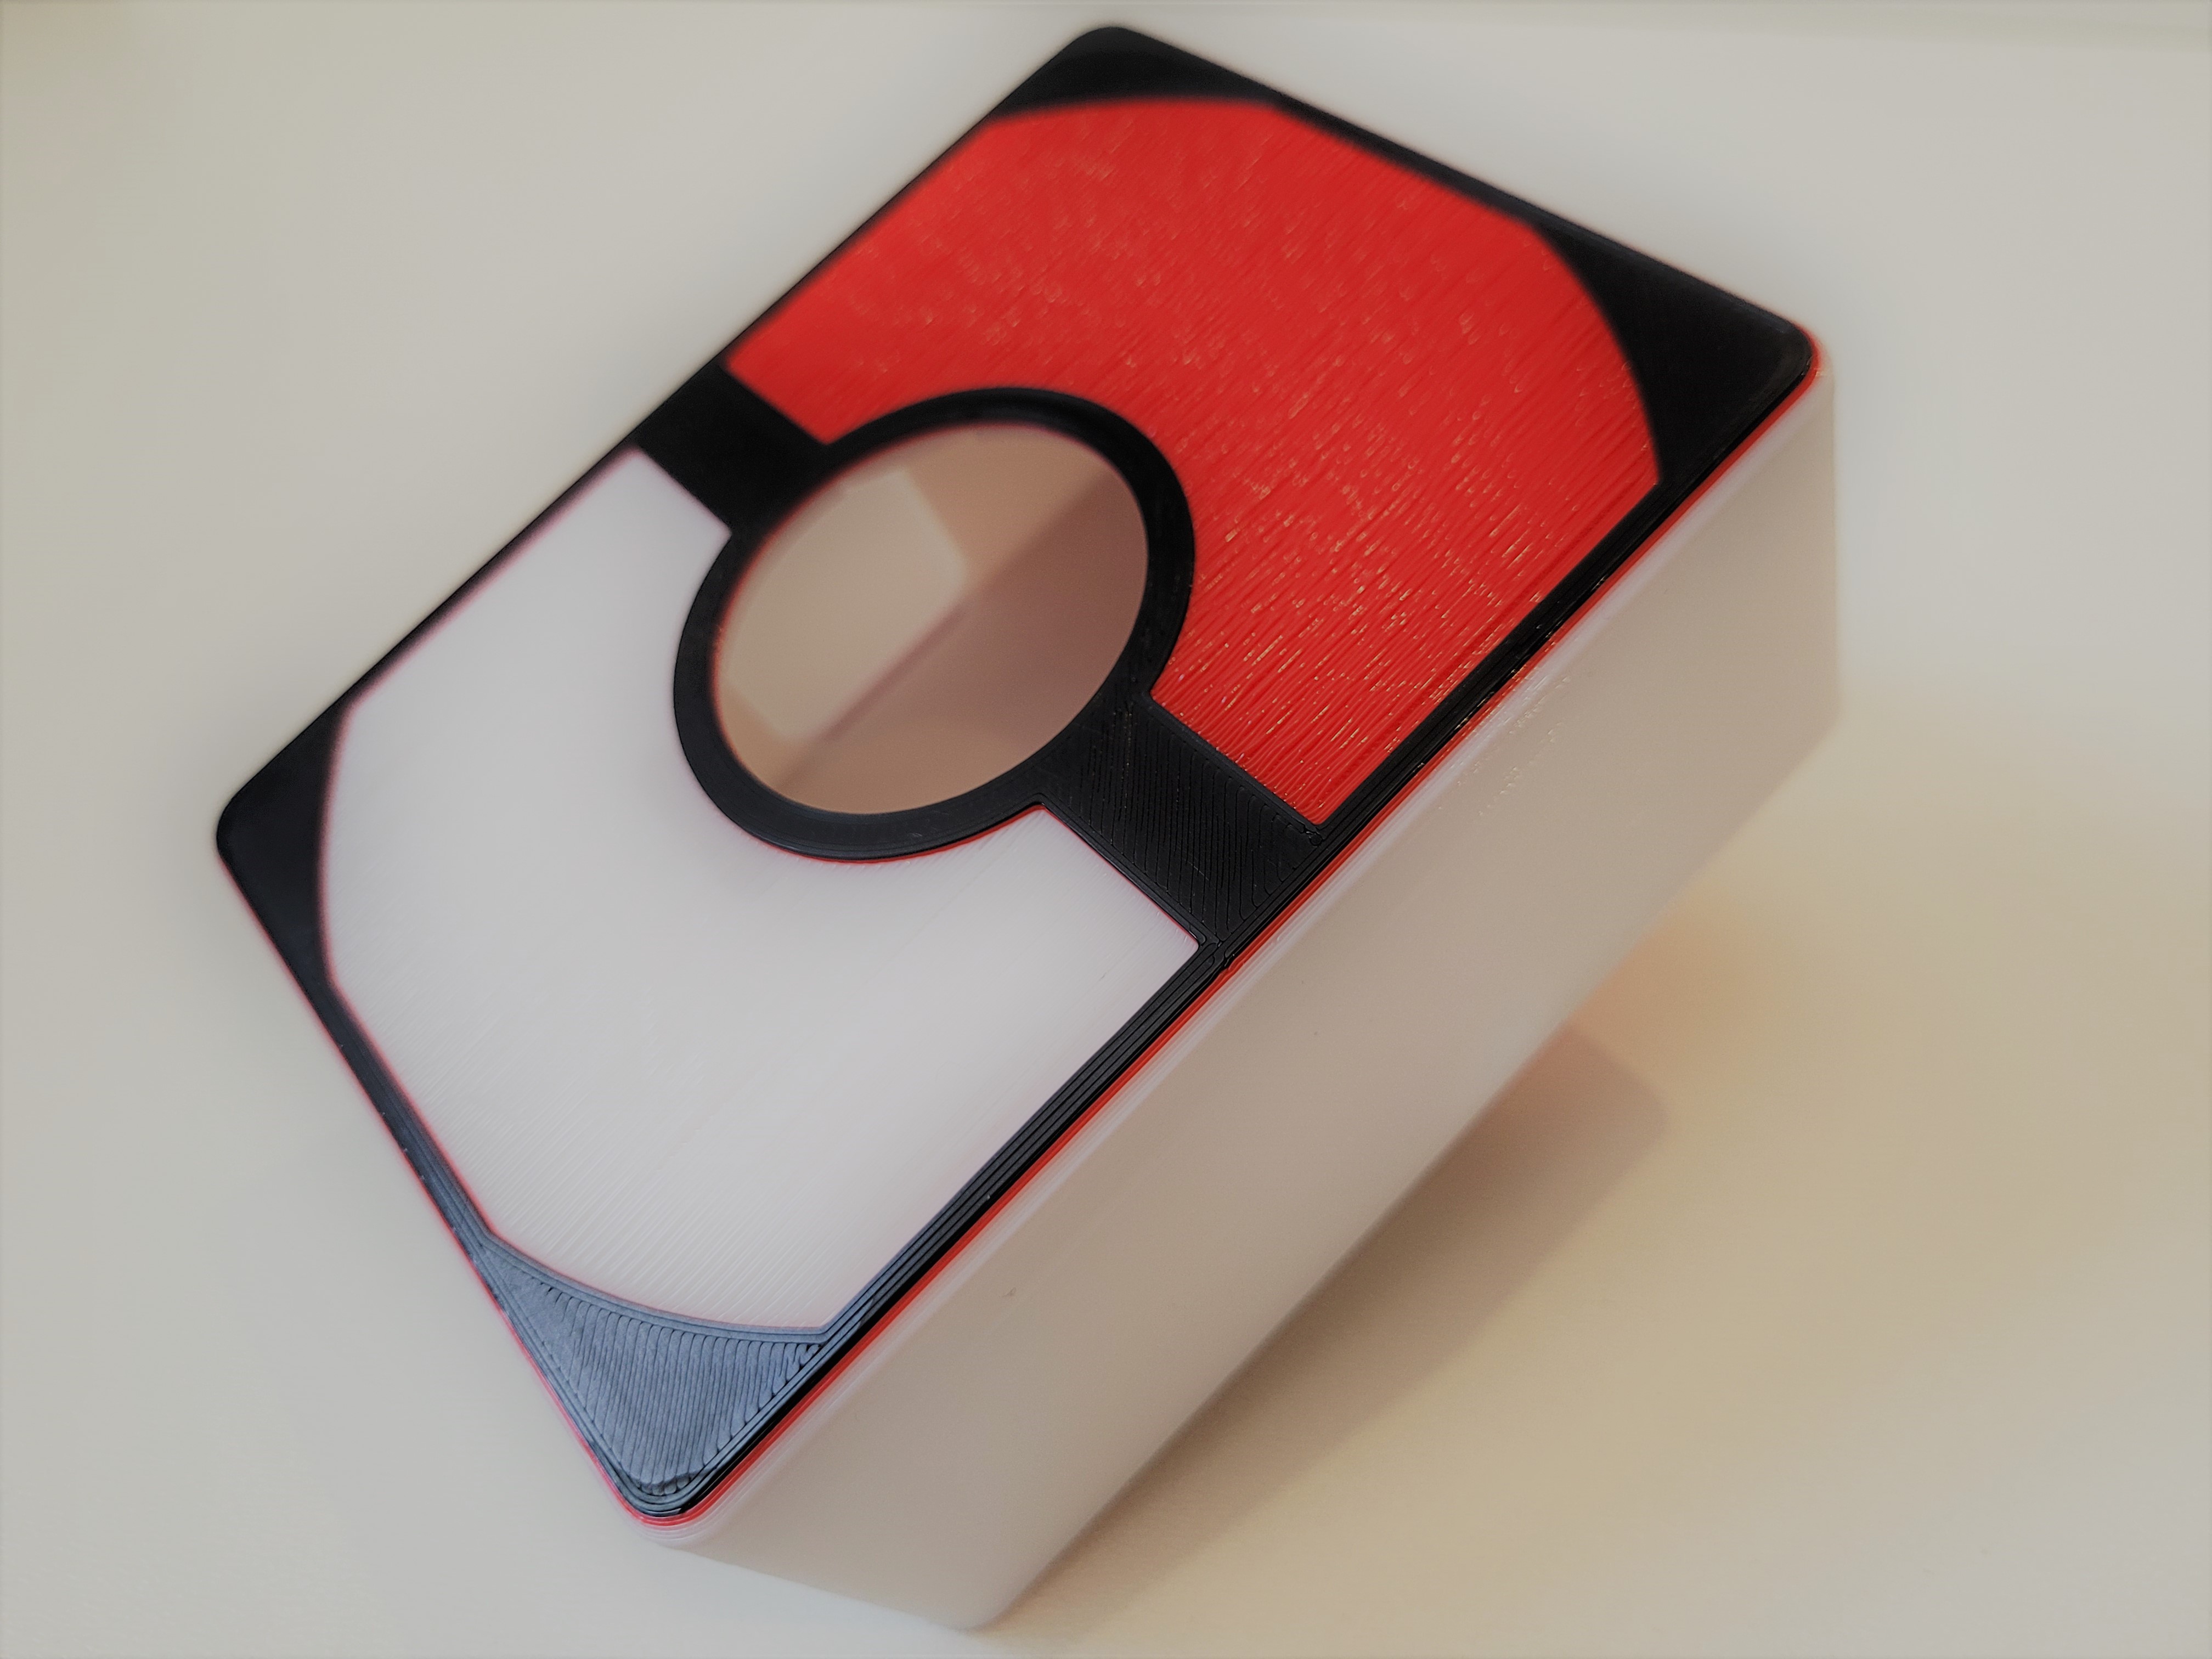 Pokemon TCG Deck Box for sleeved cards